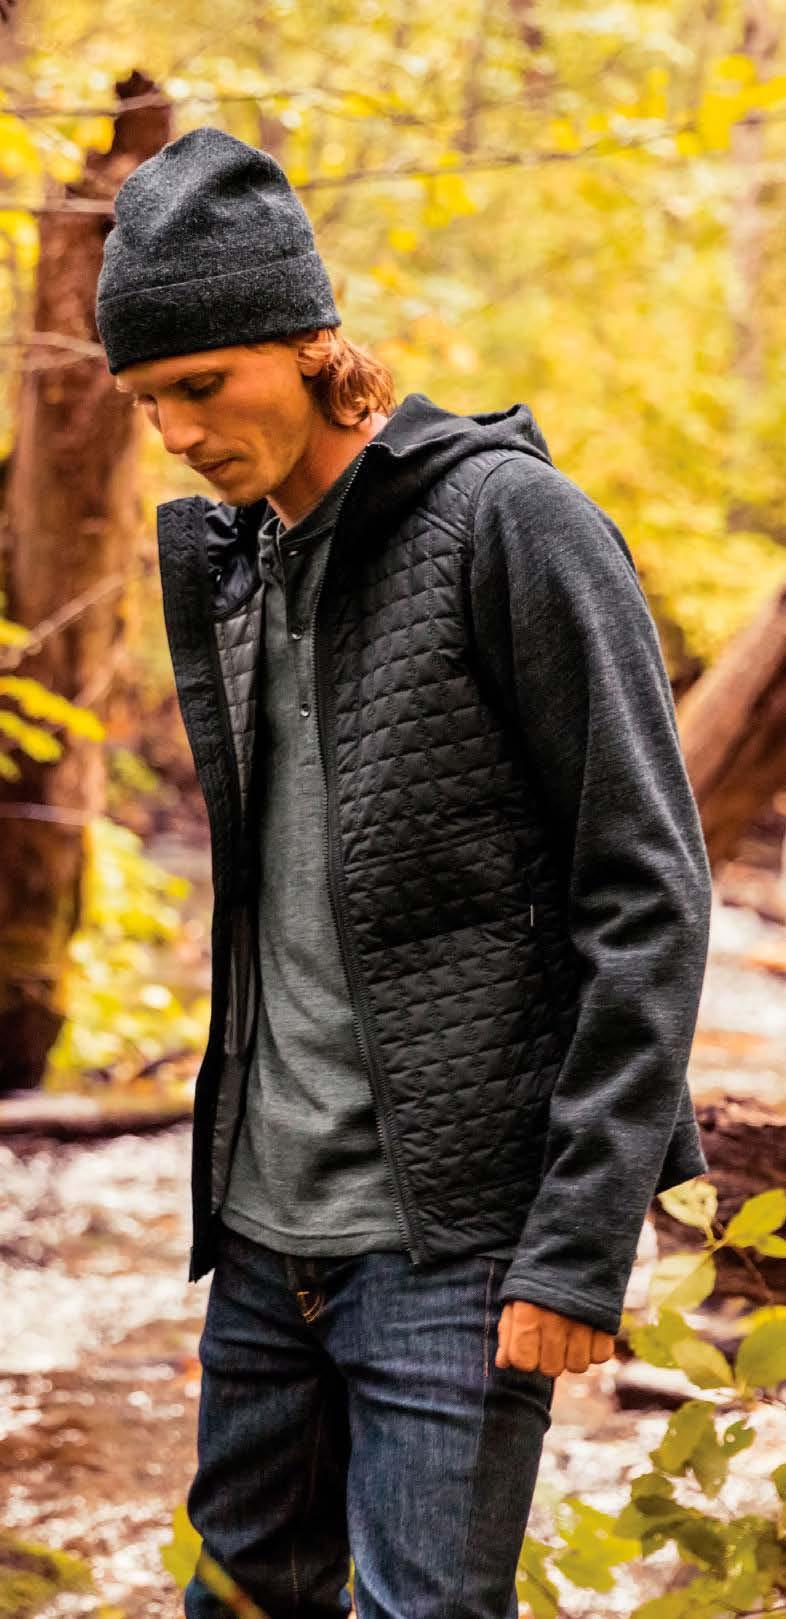 OUTDOOR STYLE or spectating at a kid s soccer game. This versatility is a pillar of Fjällräven s products, they re built for a lifetime of adventure.